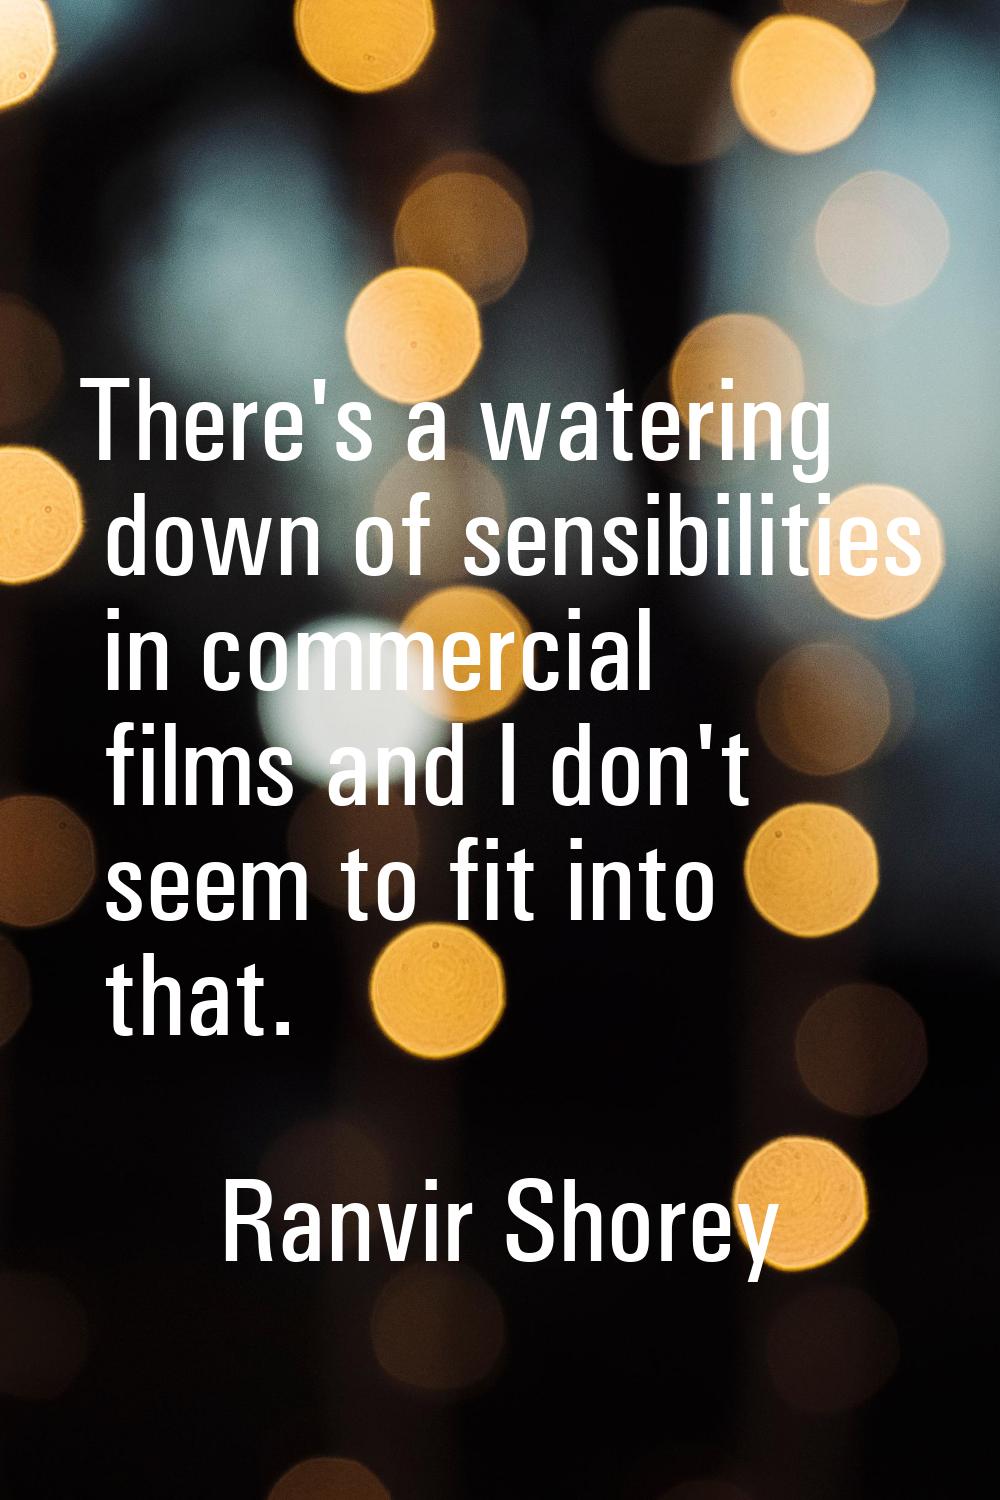 There's a watering down of sensibilities in commercial films and I don't seem to fit into that.